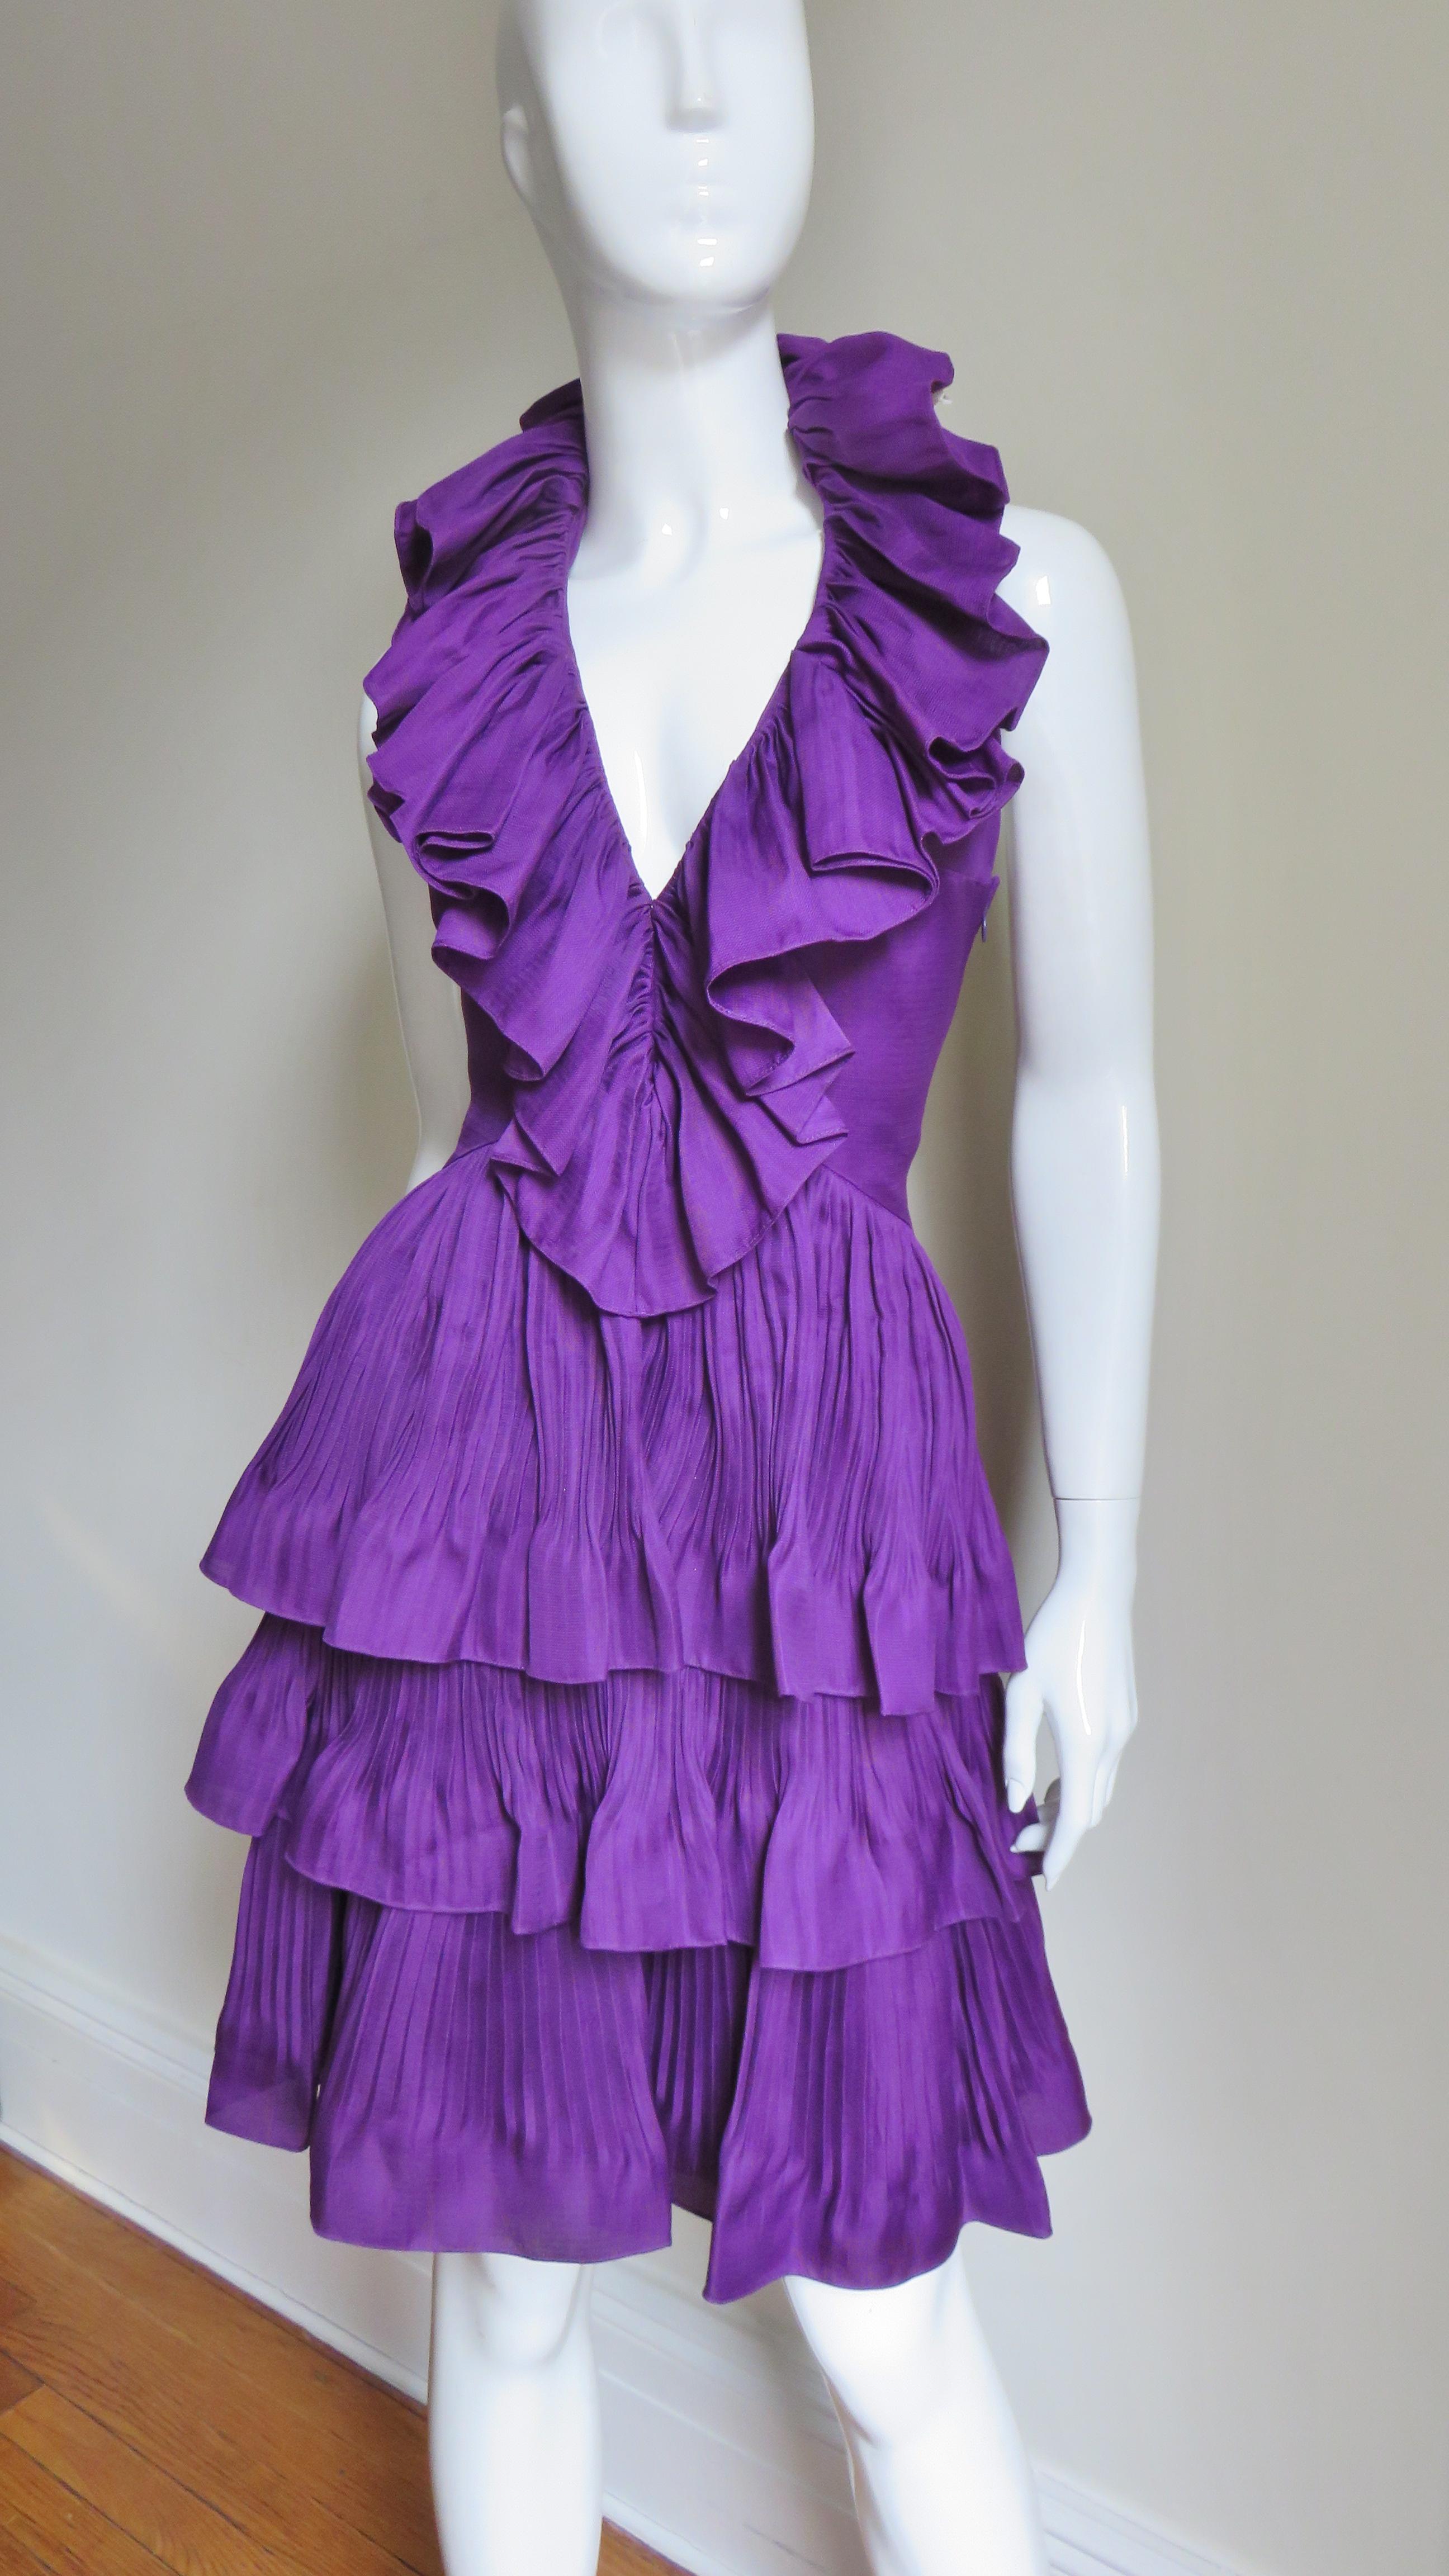 A gorgeous rich purple silk halter dress by John Galliano for Christian Dior.  It is fitted through the bodice with a stunning intricately detailed ruffle trimmed plunge halter neckline (great pains have been taken in the construction of the ruffle